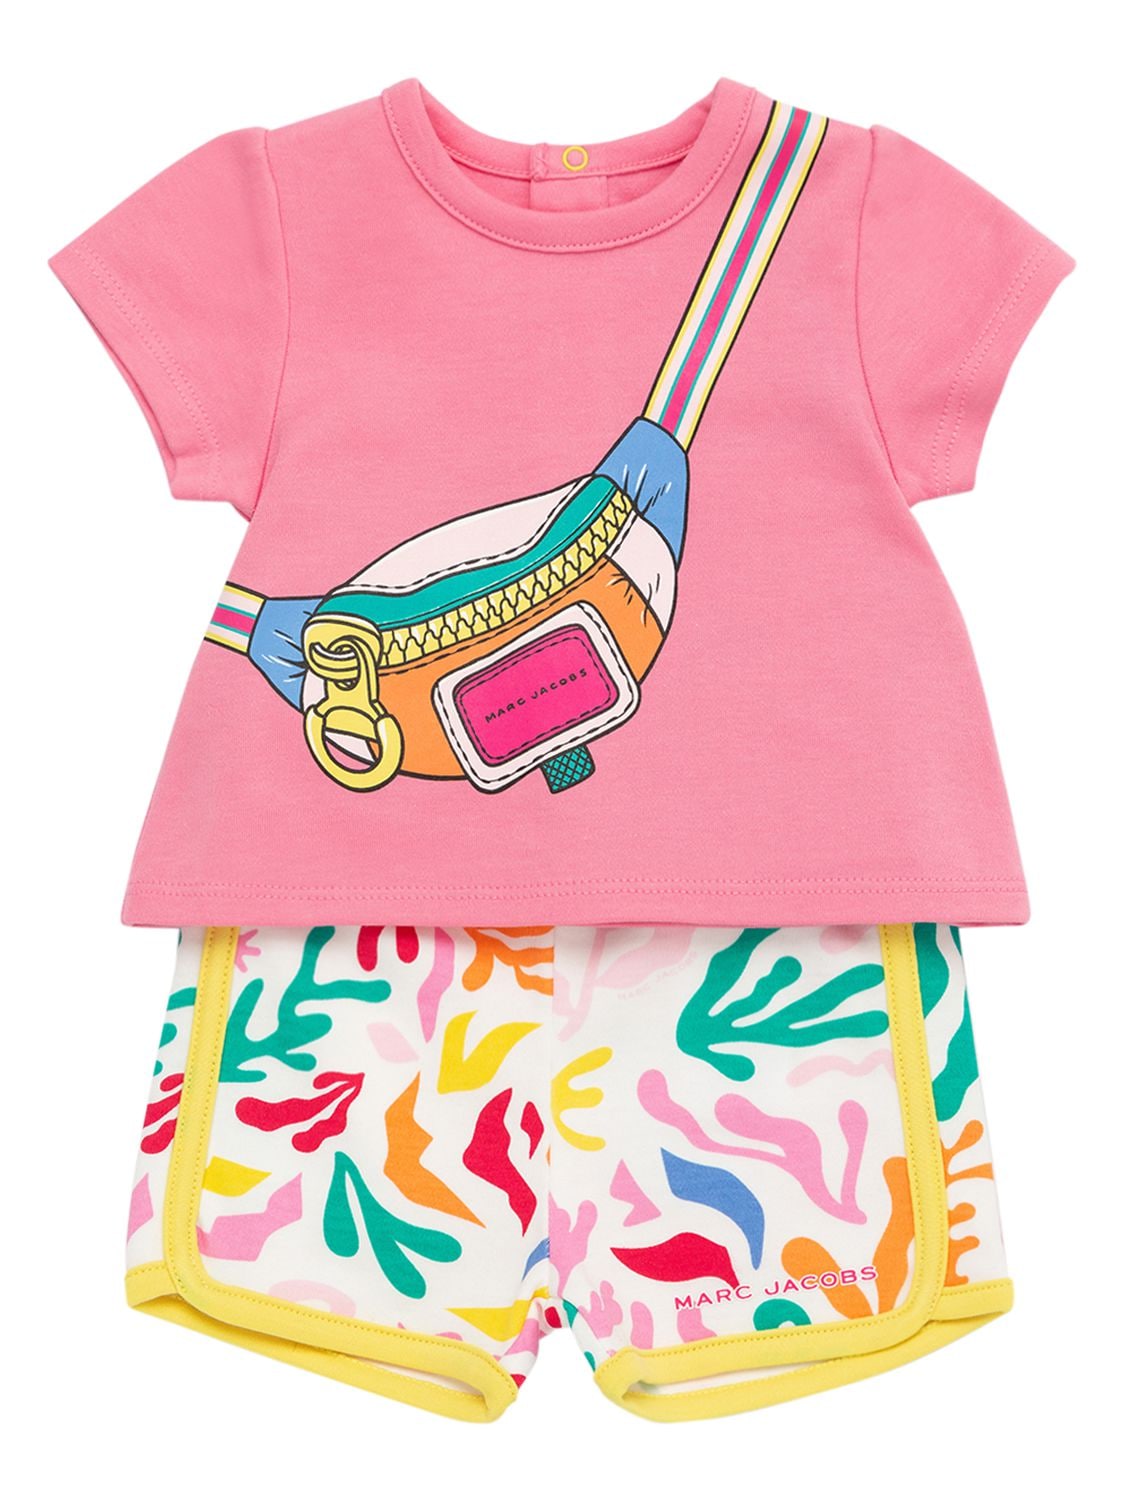 Marc Jacobs (the) Kids' Printed Cotton T-shirt & Shorts In Pink,multi